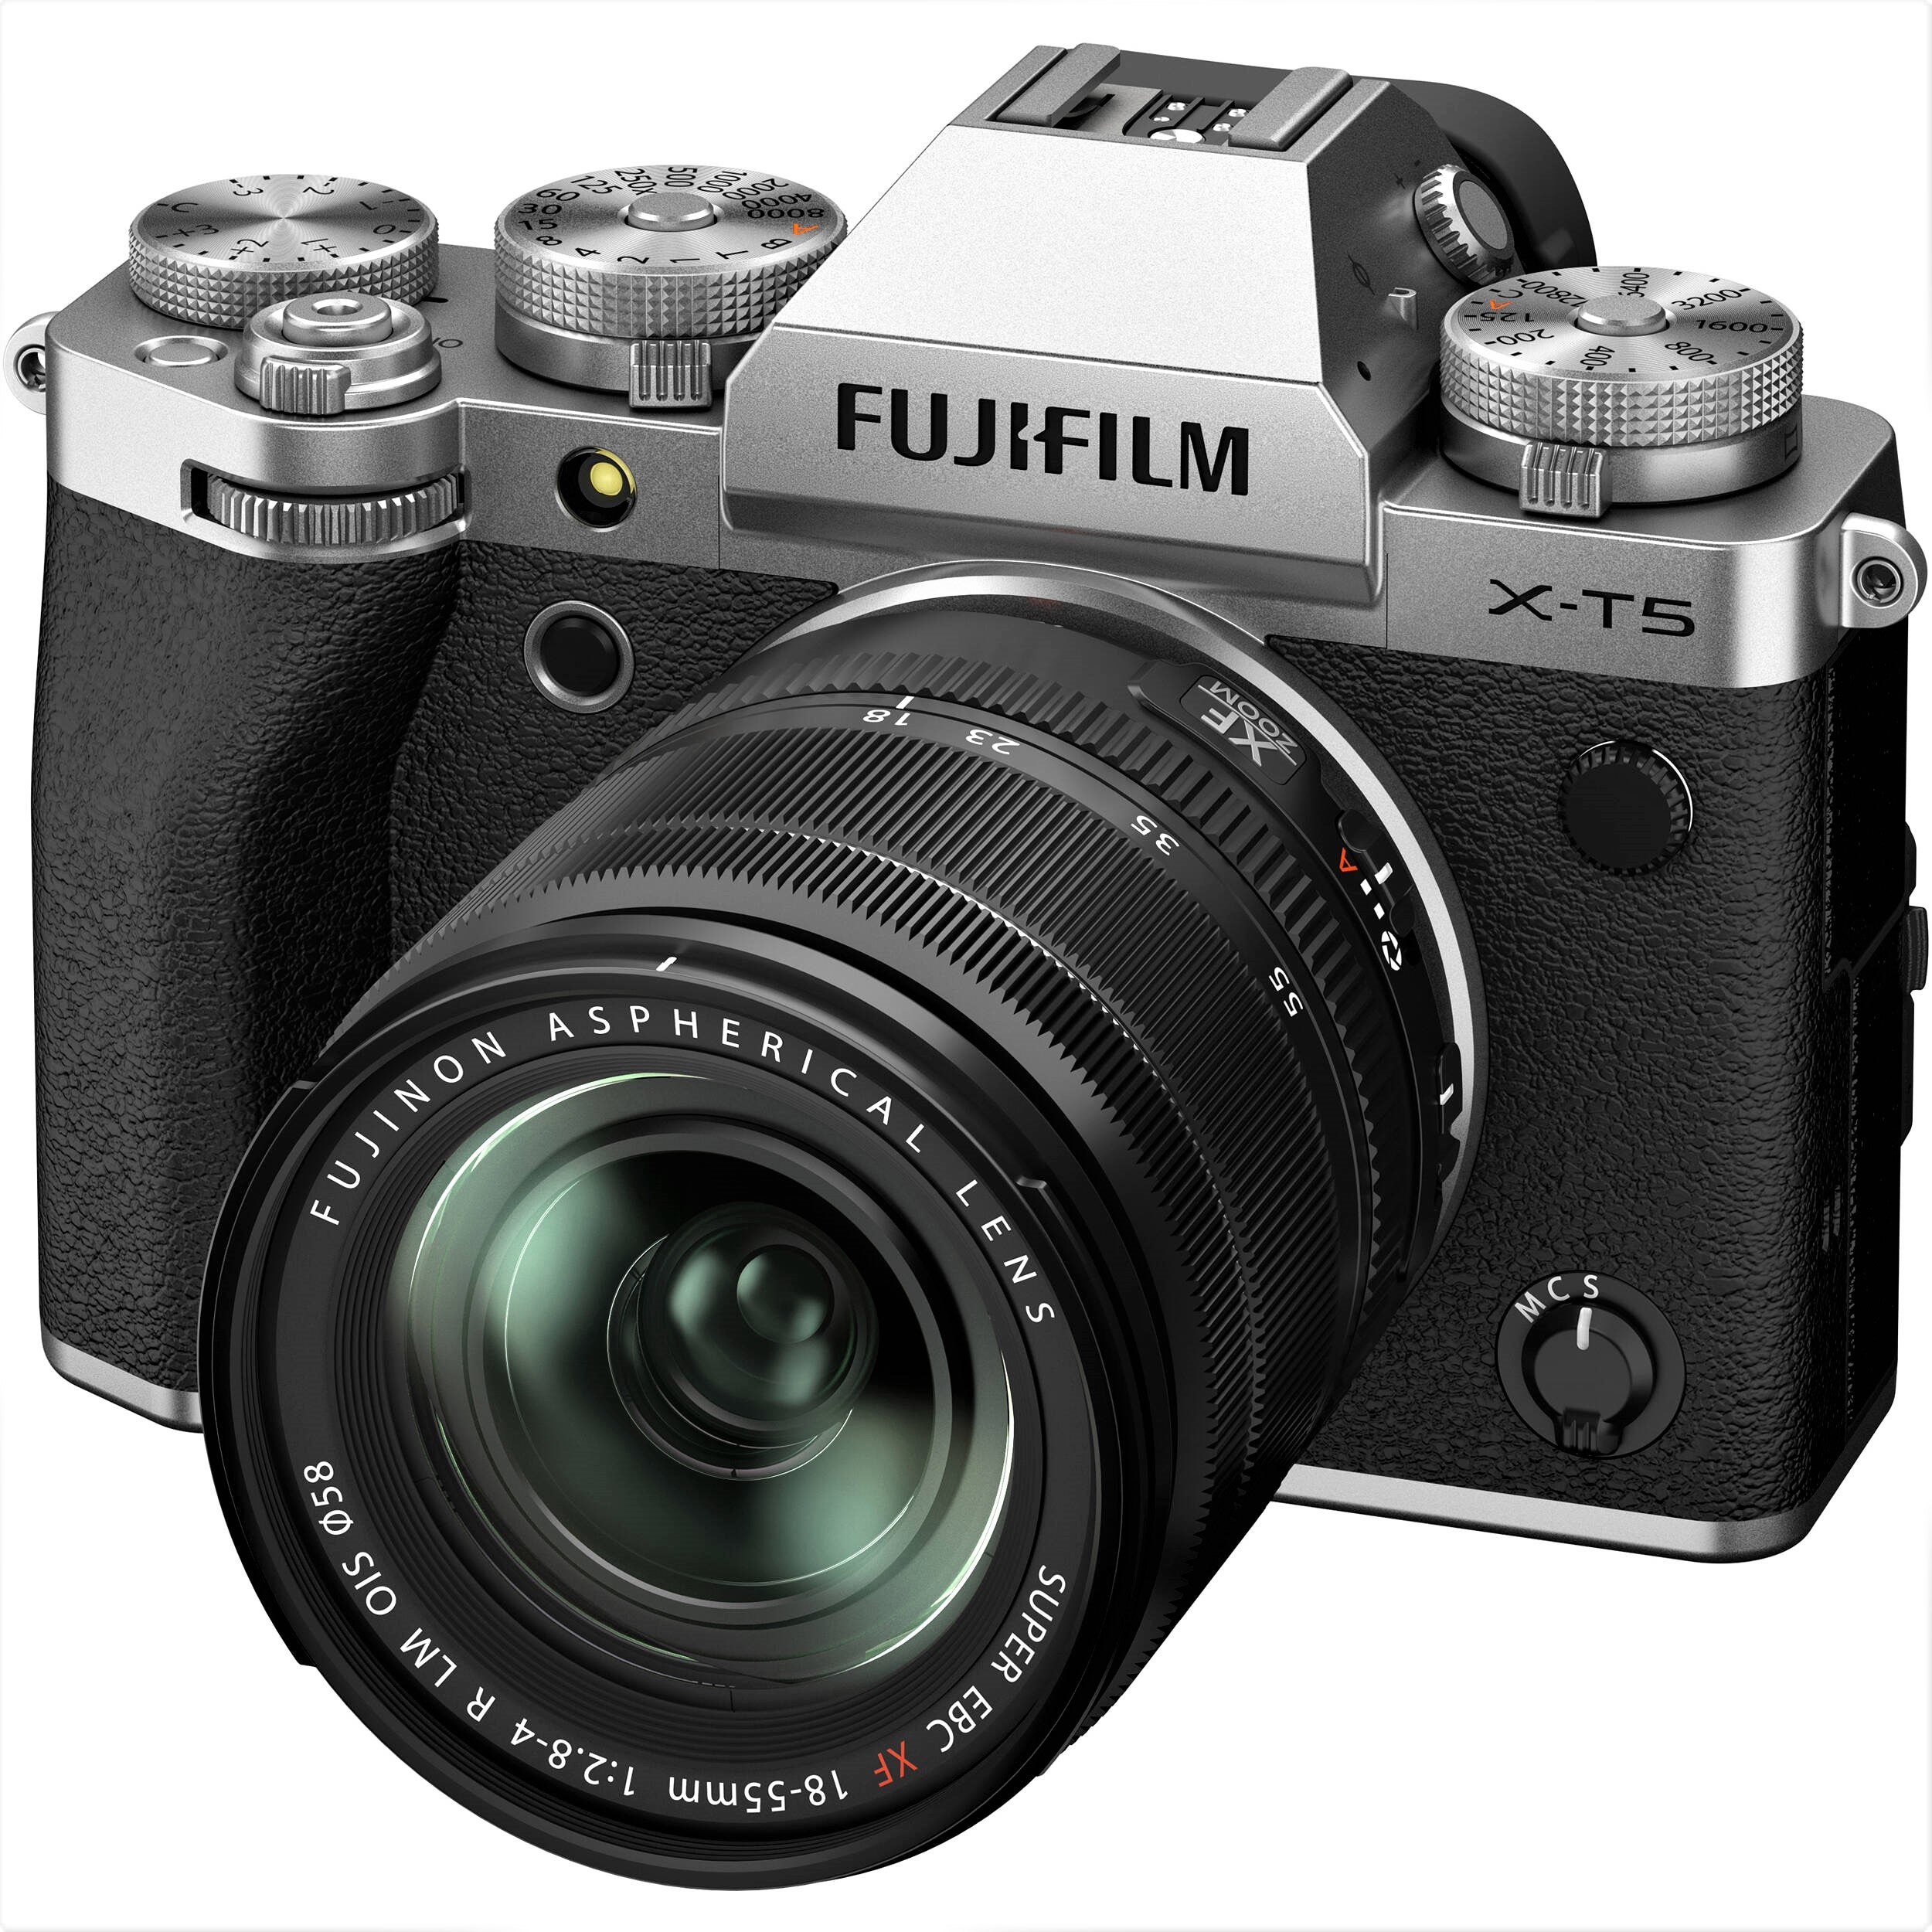 Fujifilm X-T5 Mirrorless Camera with 18-55mm Lens (Silver) - Top View